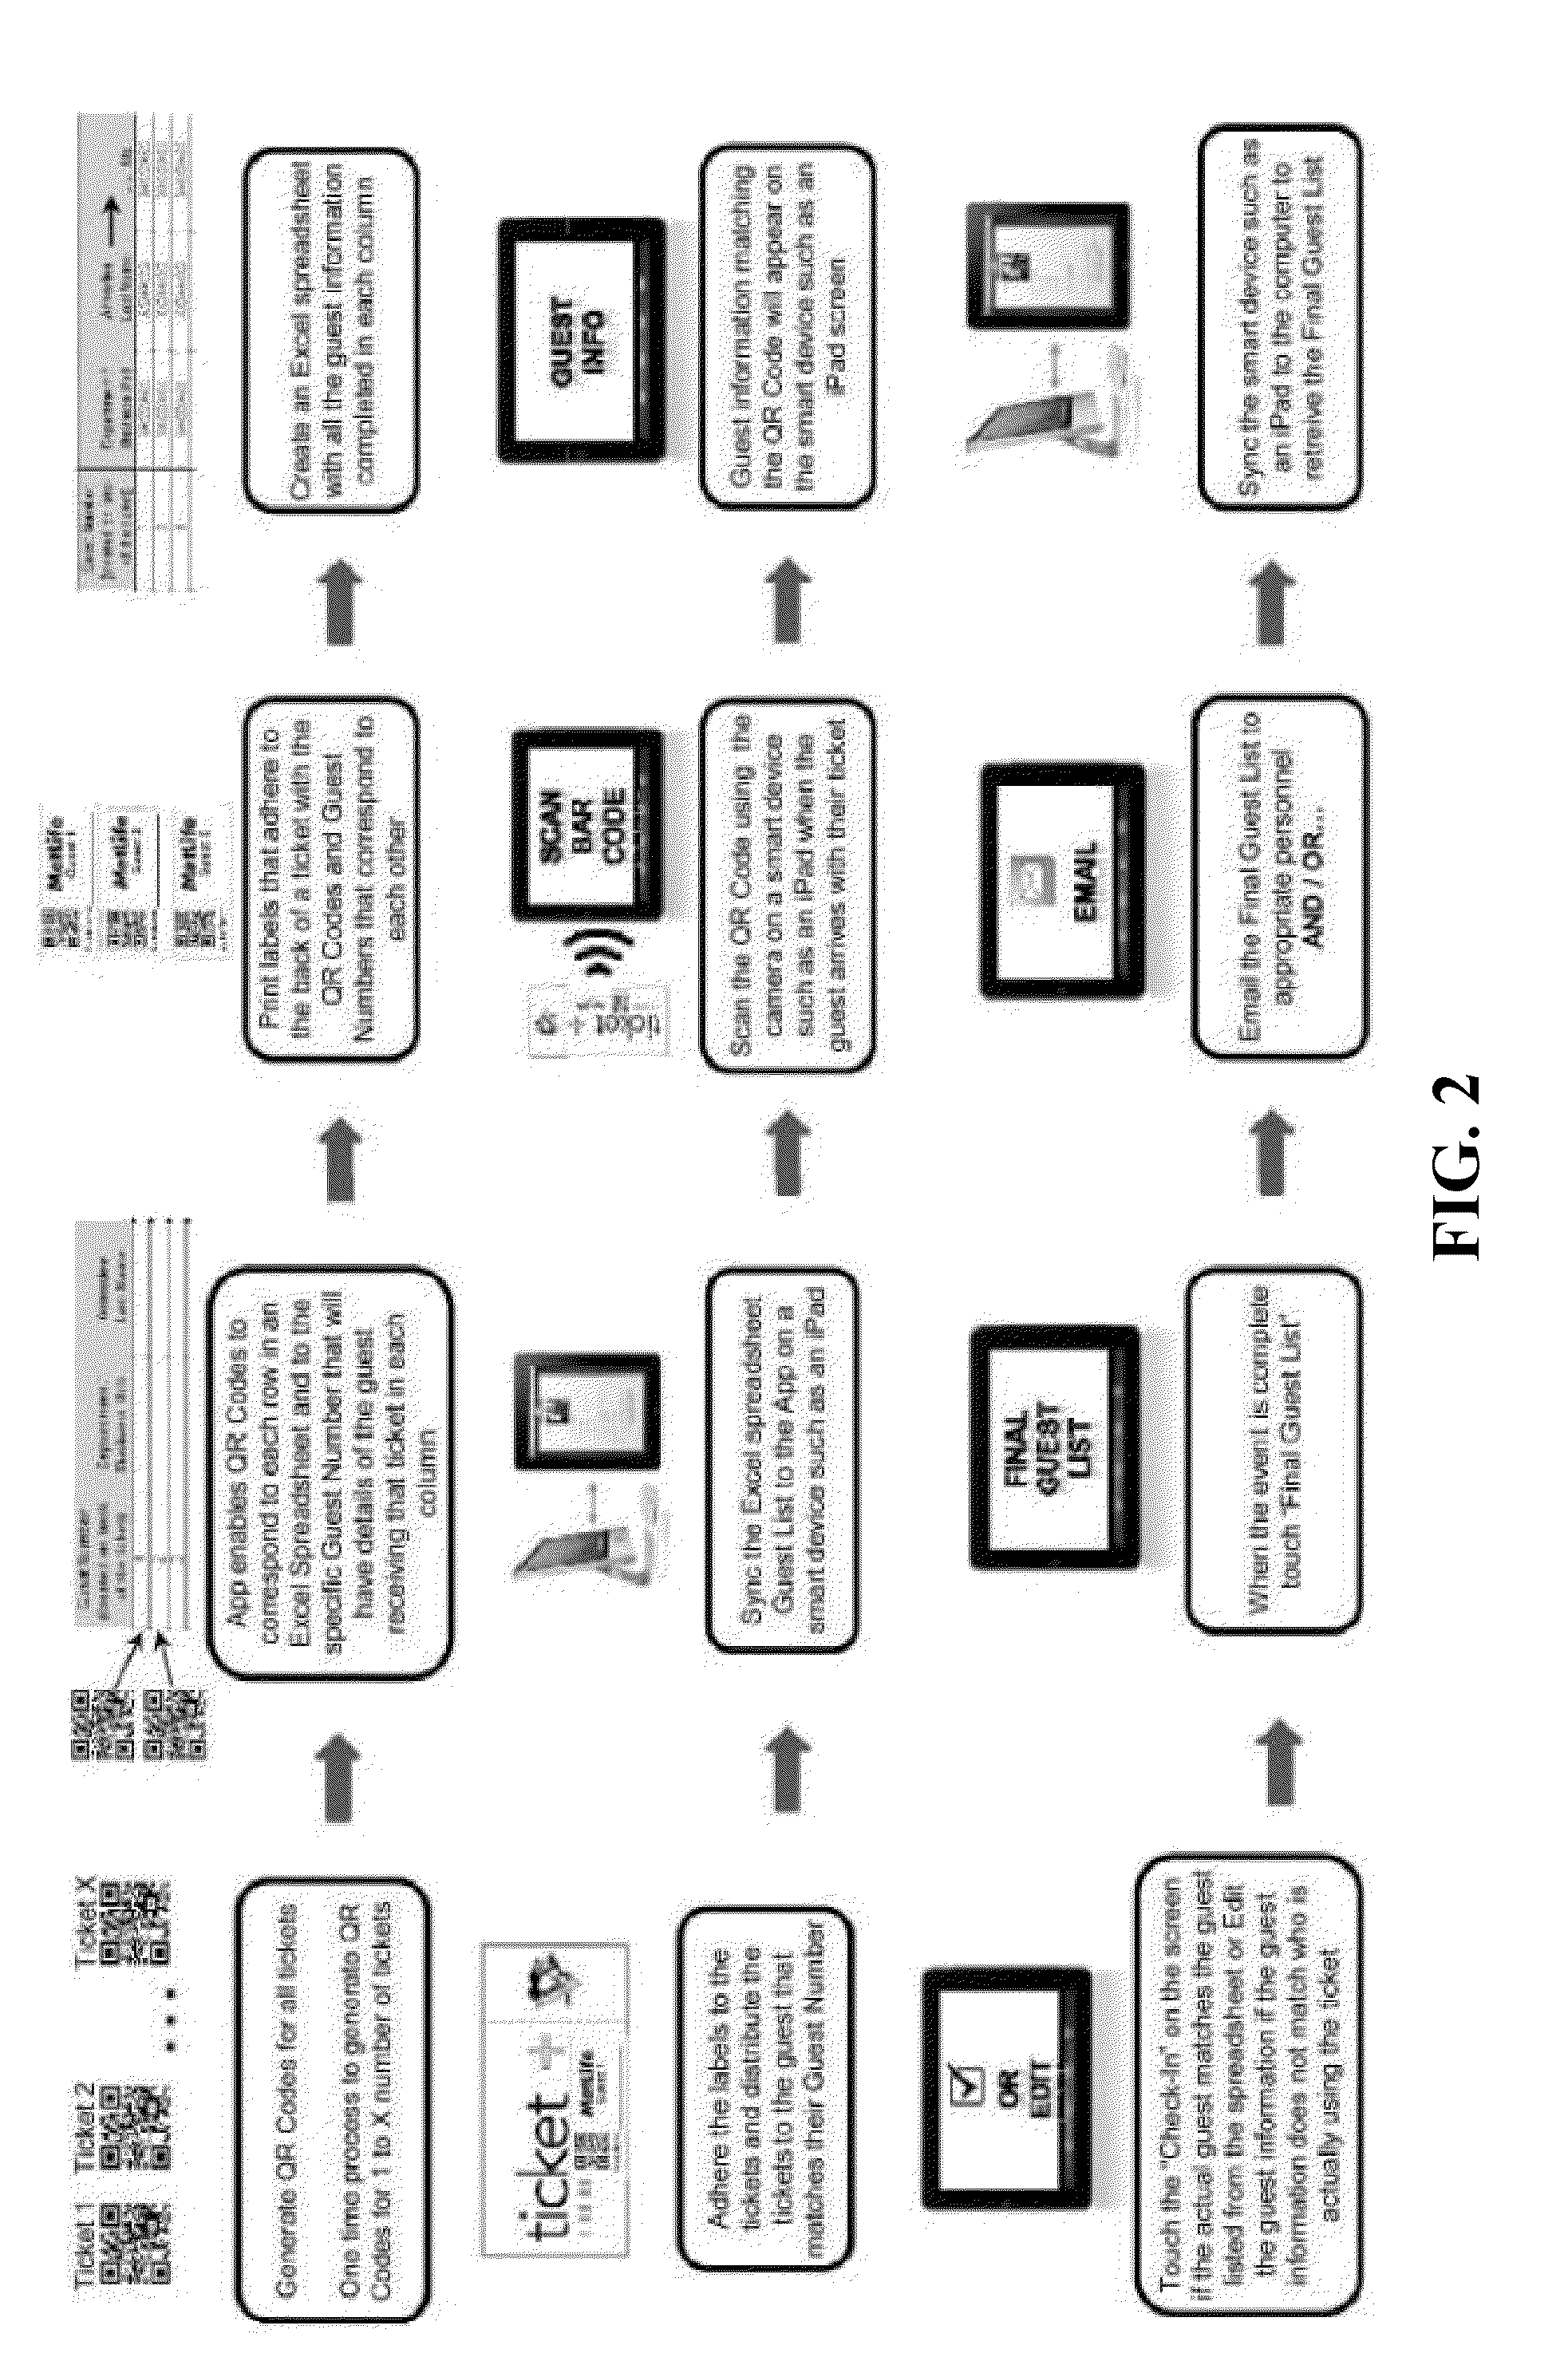 System for Authentication and Tracking of Event Tickets